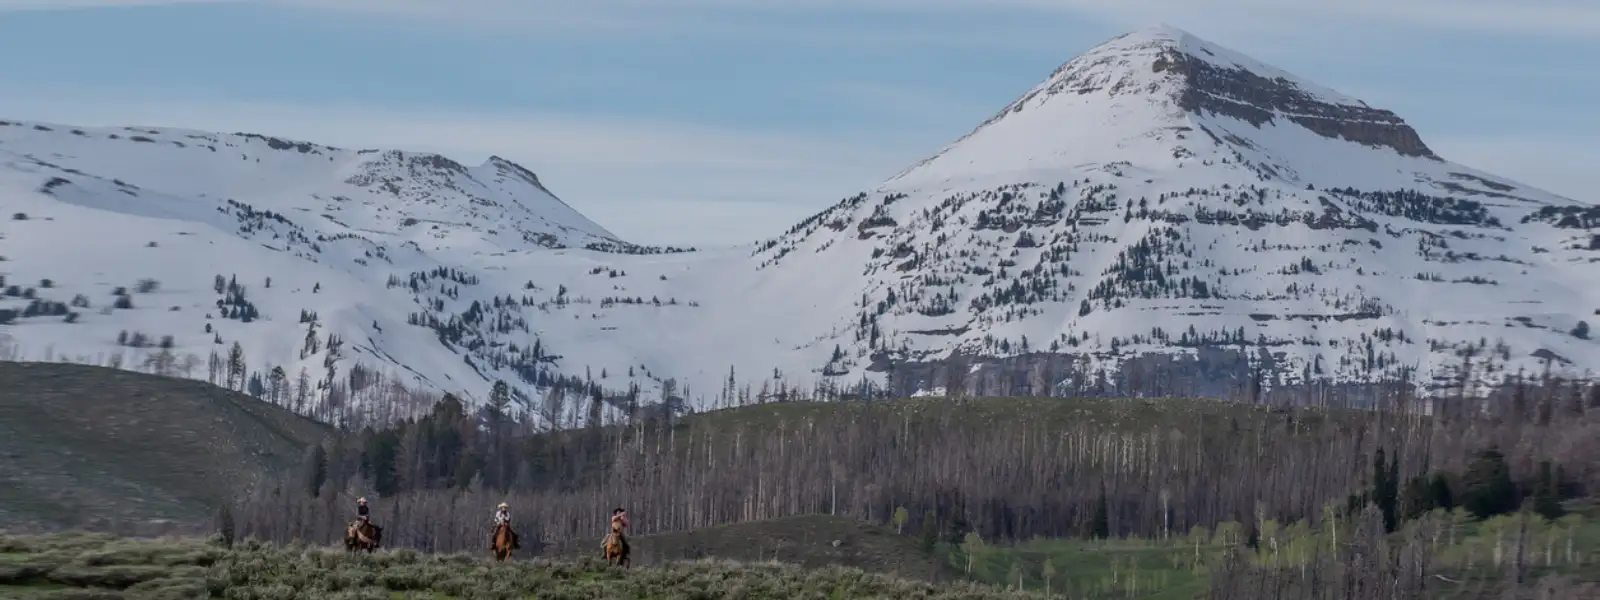 Three people riding on horseback with two Gros Ventre mountain peaks in the background.